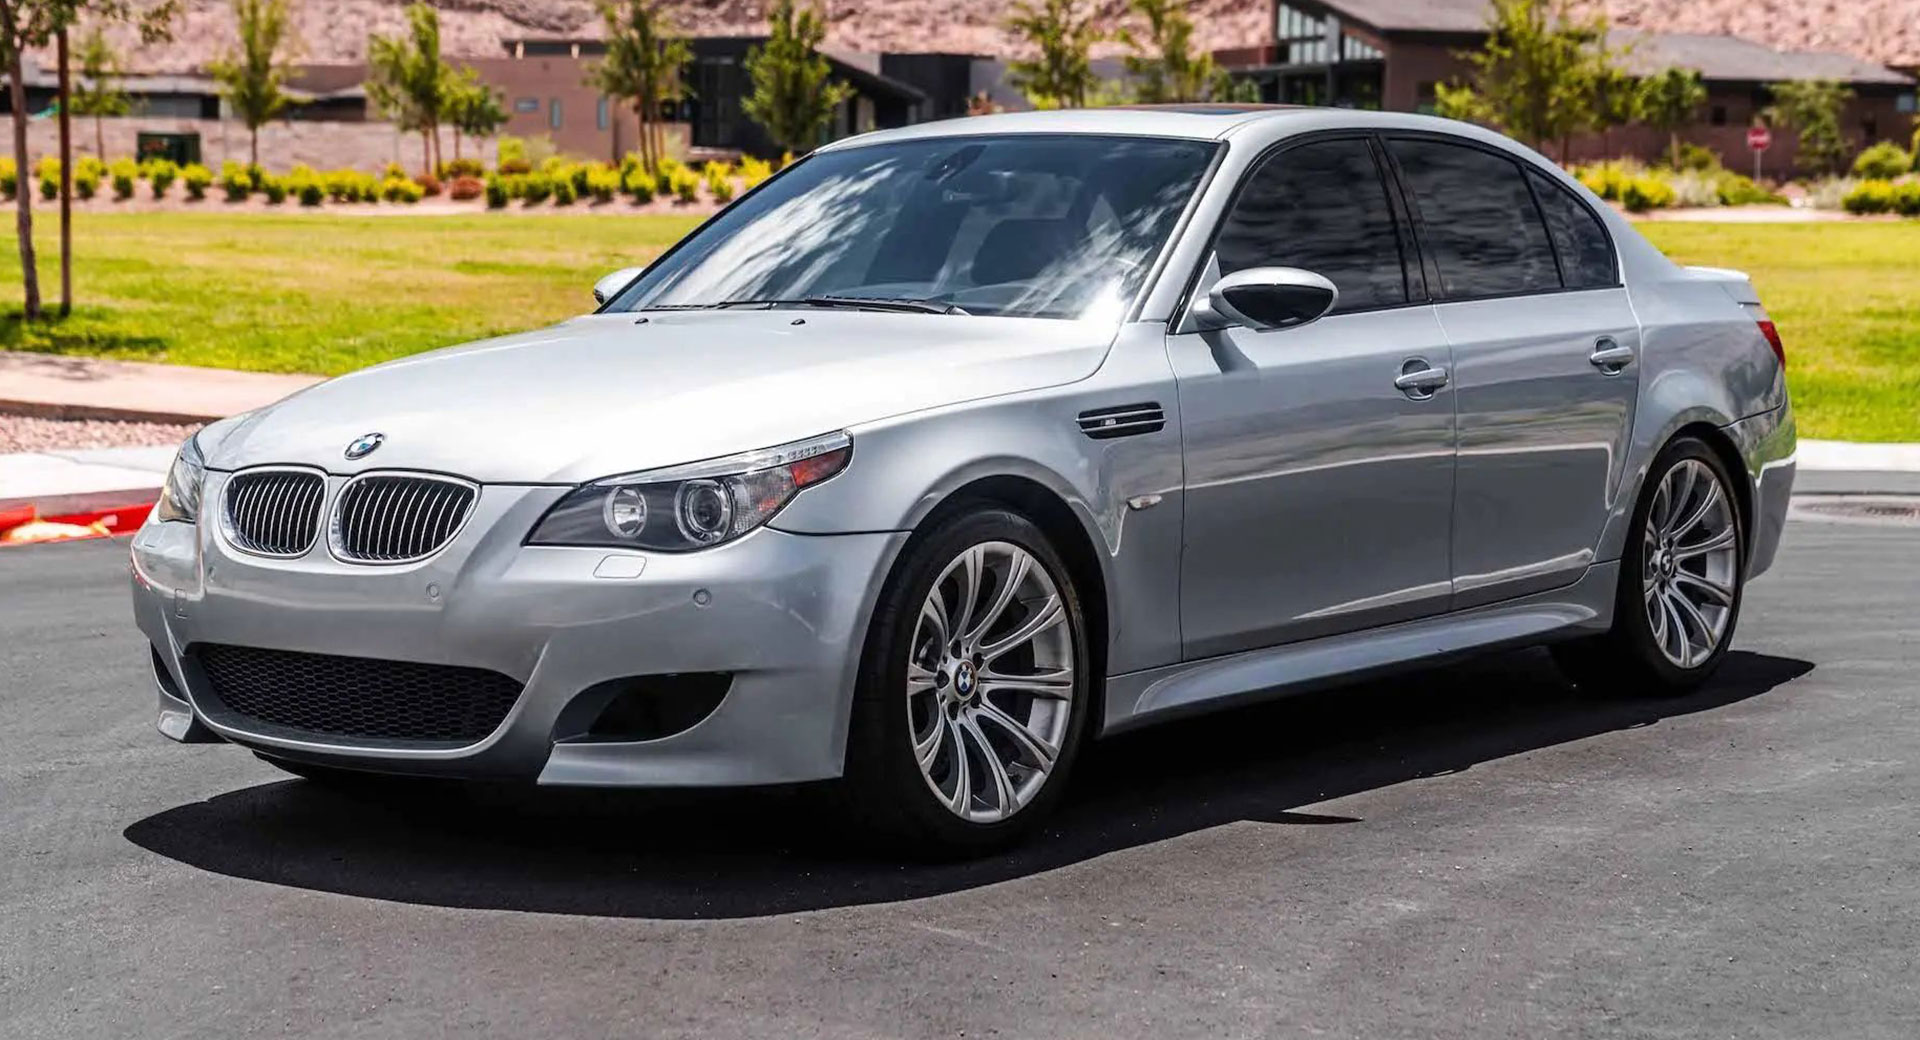 Buying This BMW M5 Will Get You One Of The Last Great V10s